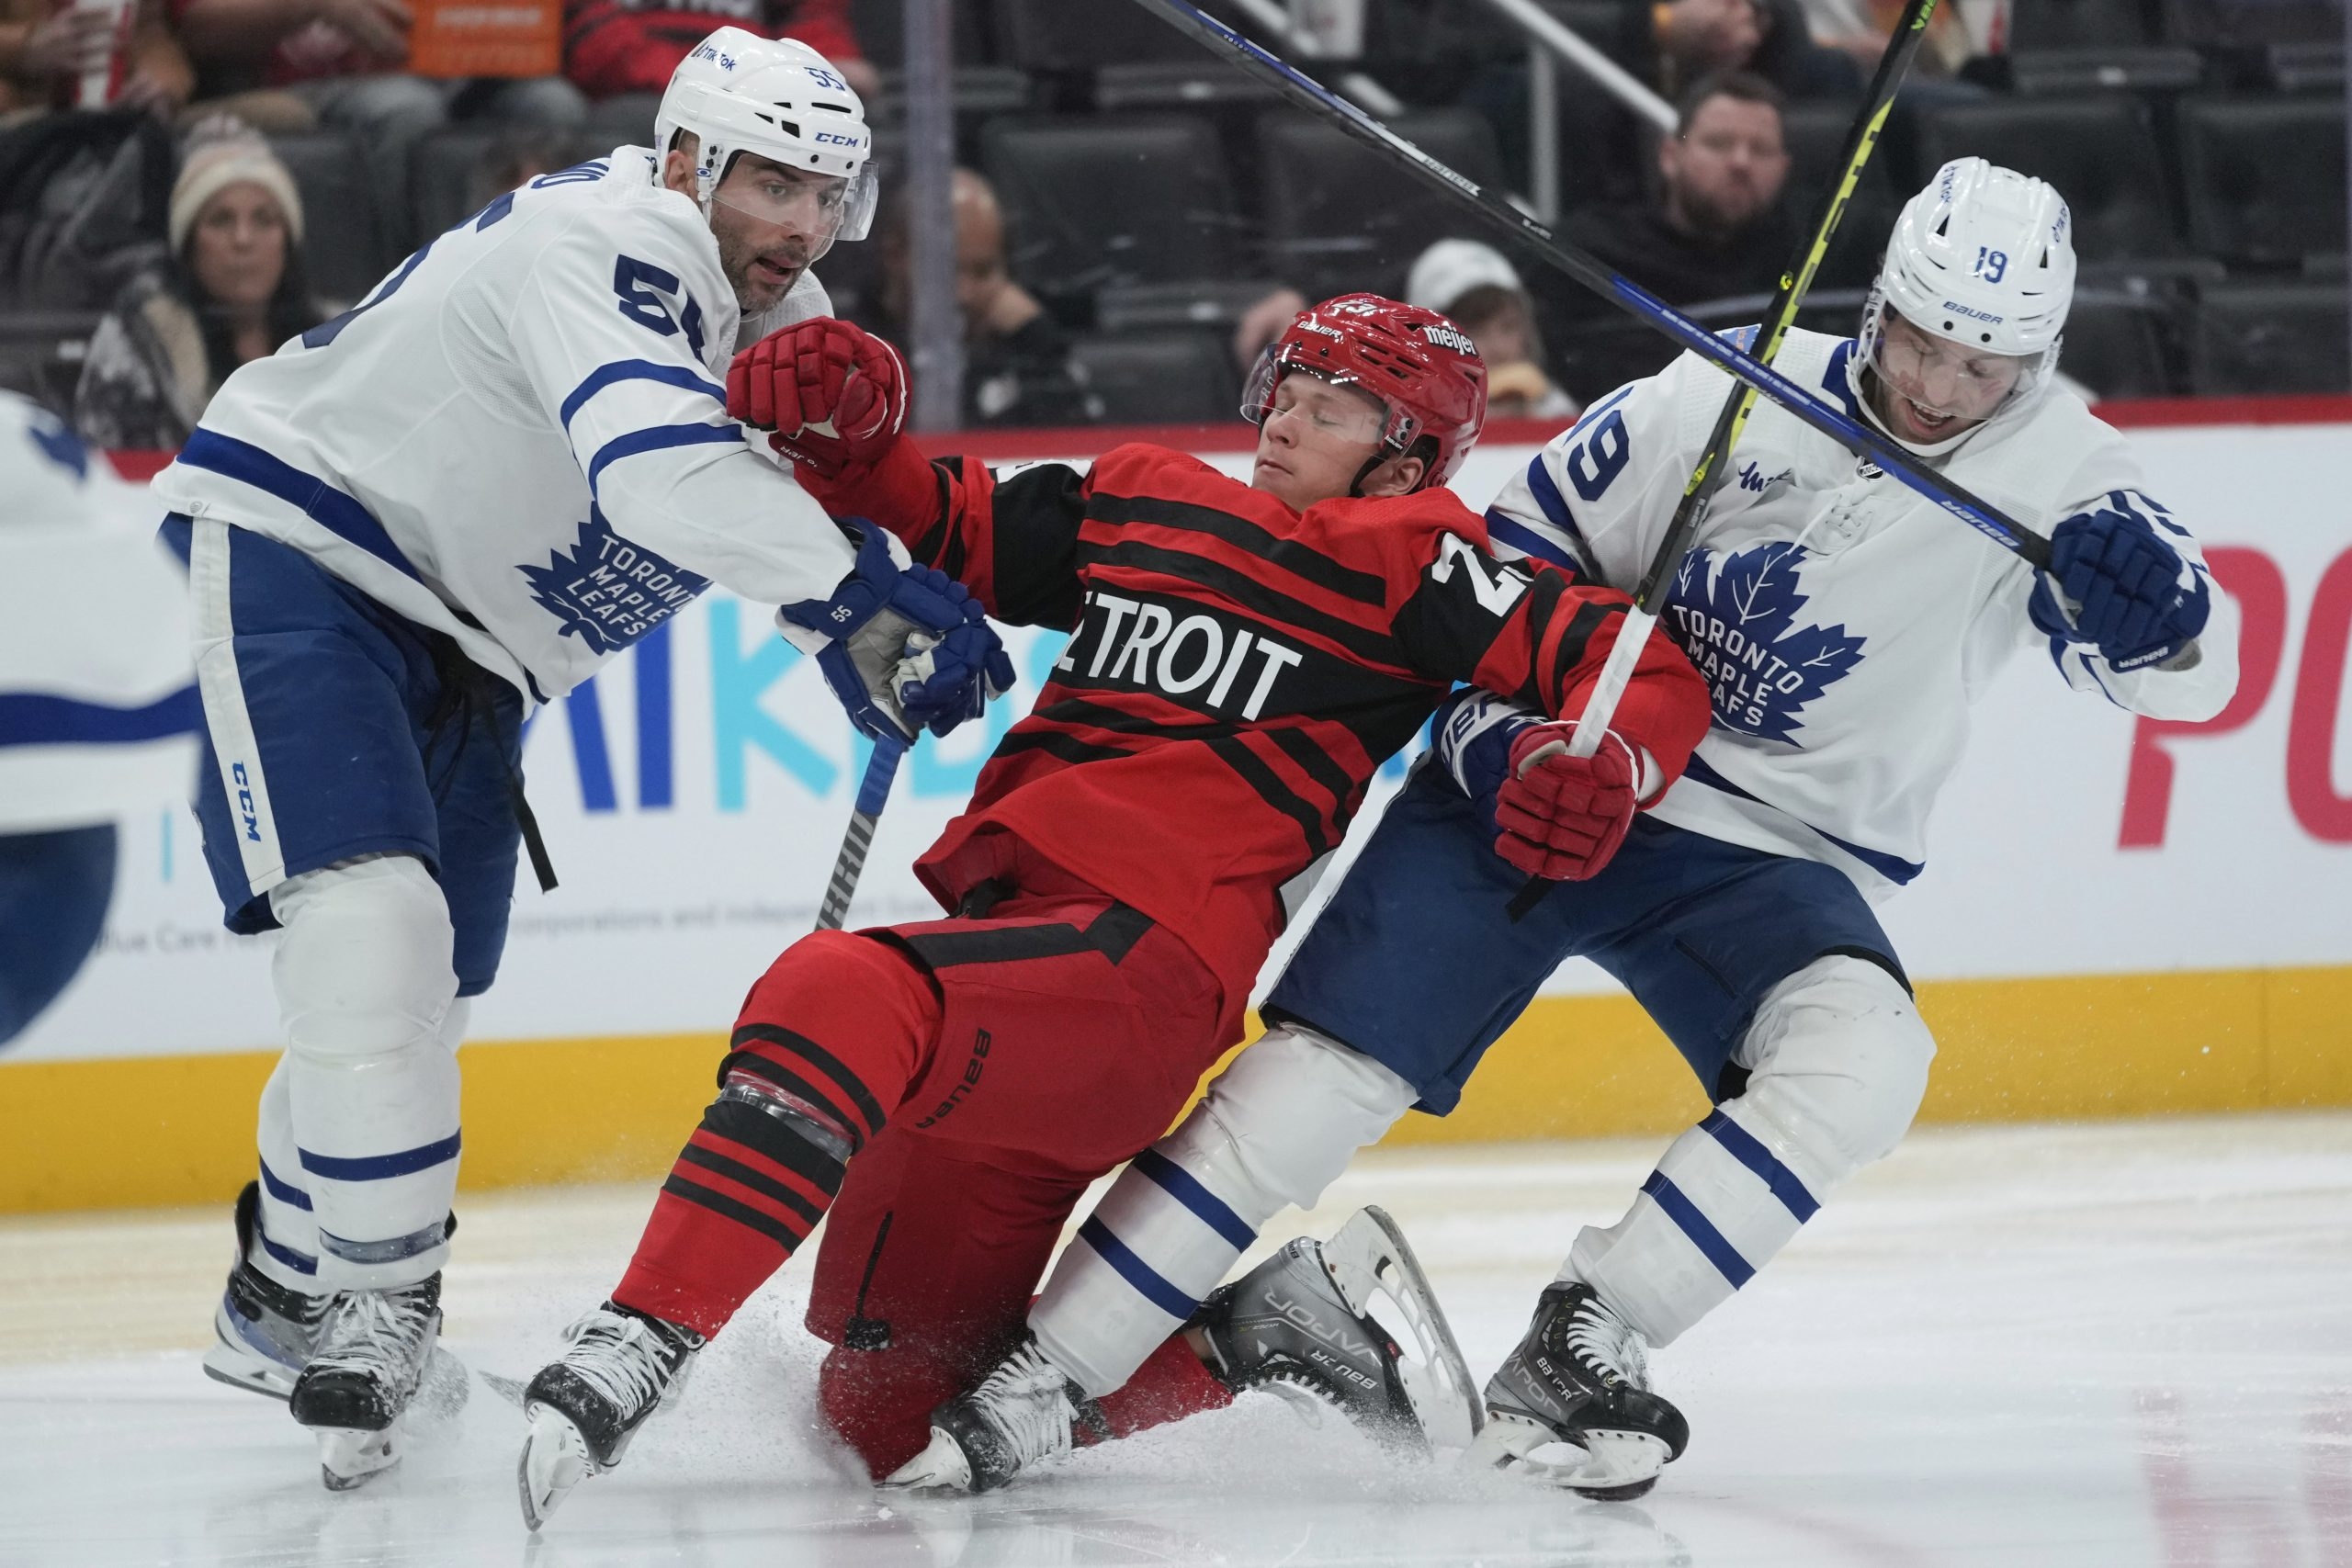 Marner extends streak as Maple Leafs cap trip with fourth win | Toronto Sun